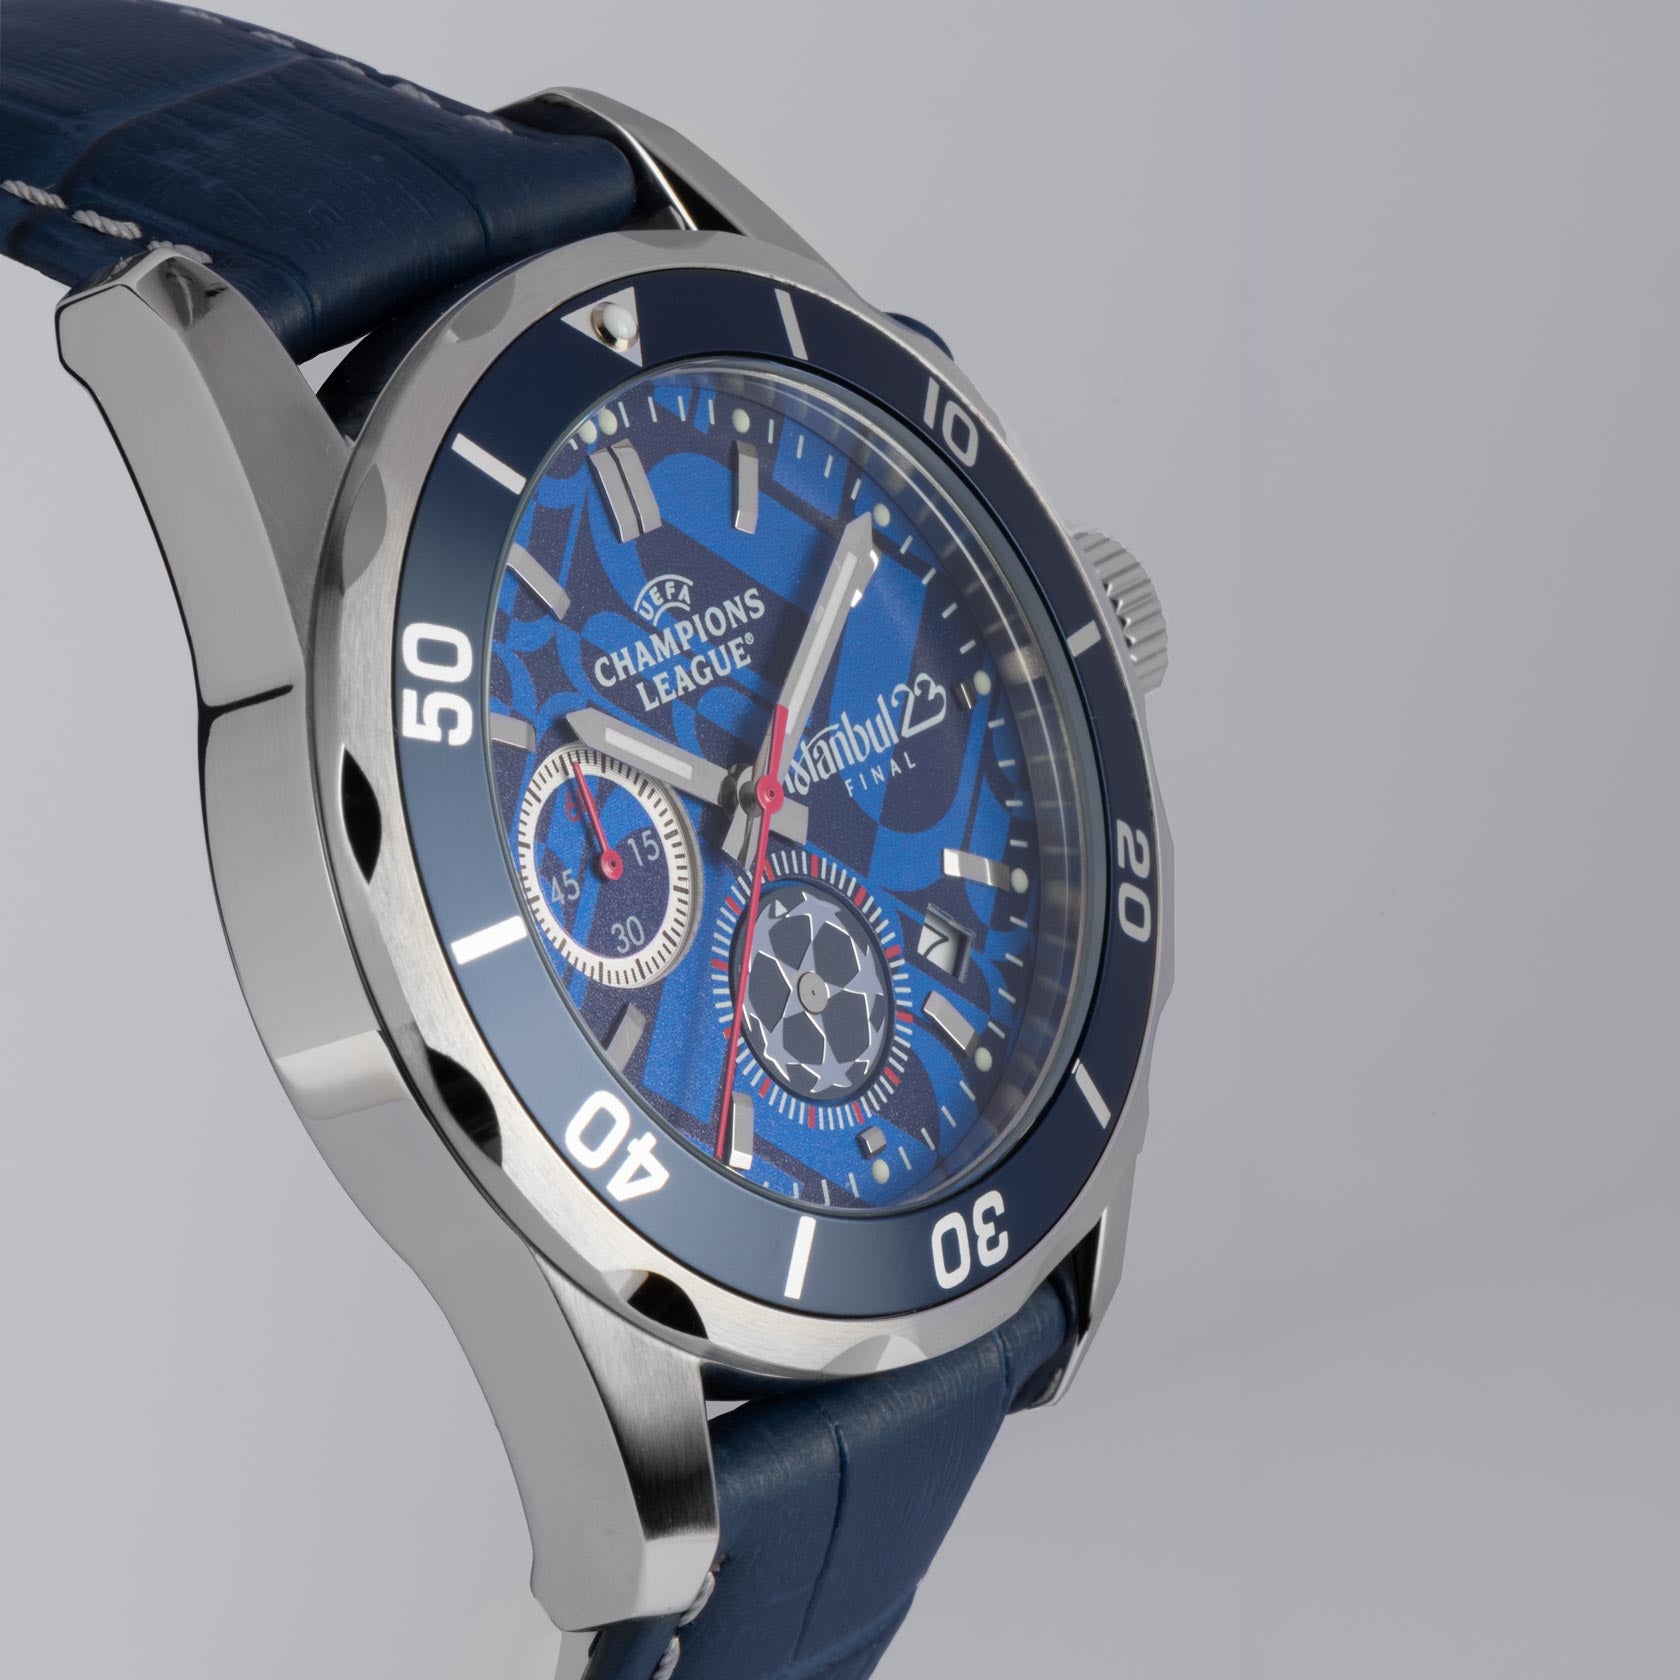 UCL Istanbul Final 2023 Chronograph CL-103D Jacques Lemans Watch UEFA Club Competitions Online Store